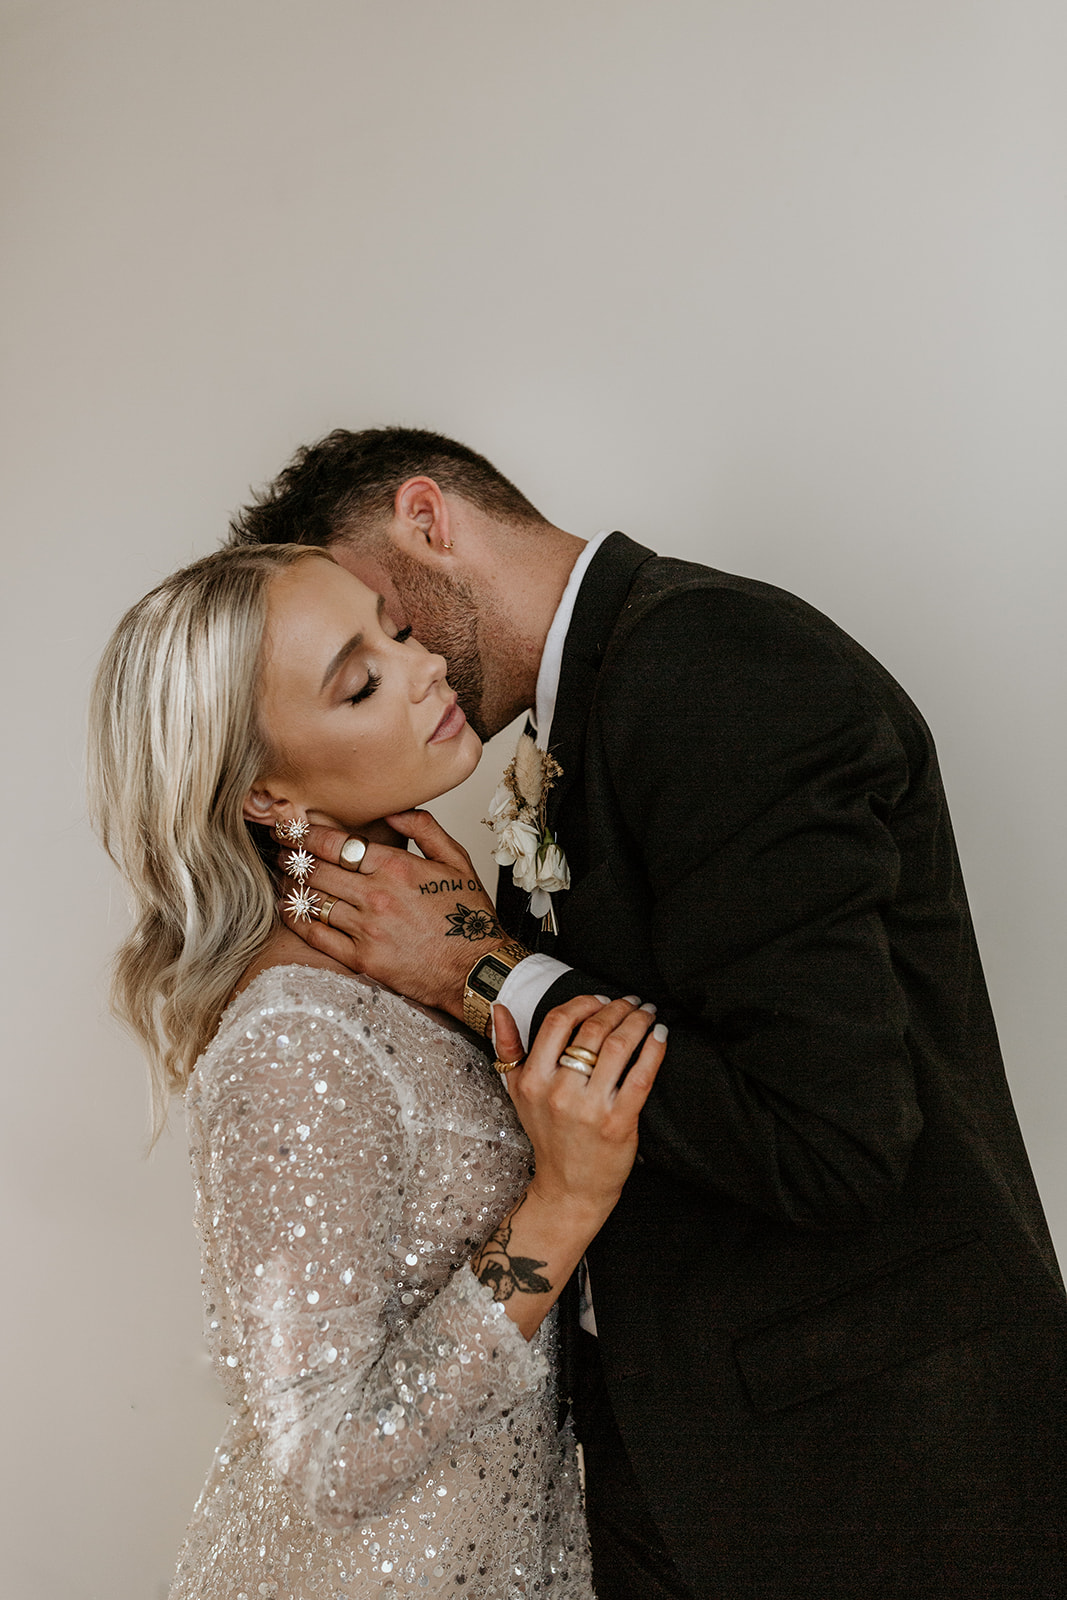 A groom leans in to kiss his bride on her neck during their modern and edgy styled wedding shoot at the Birdie by Morgan Wirth Photography.